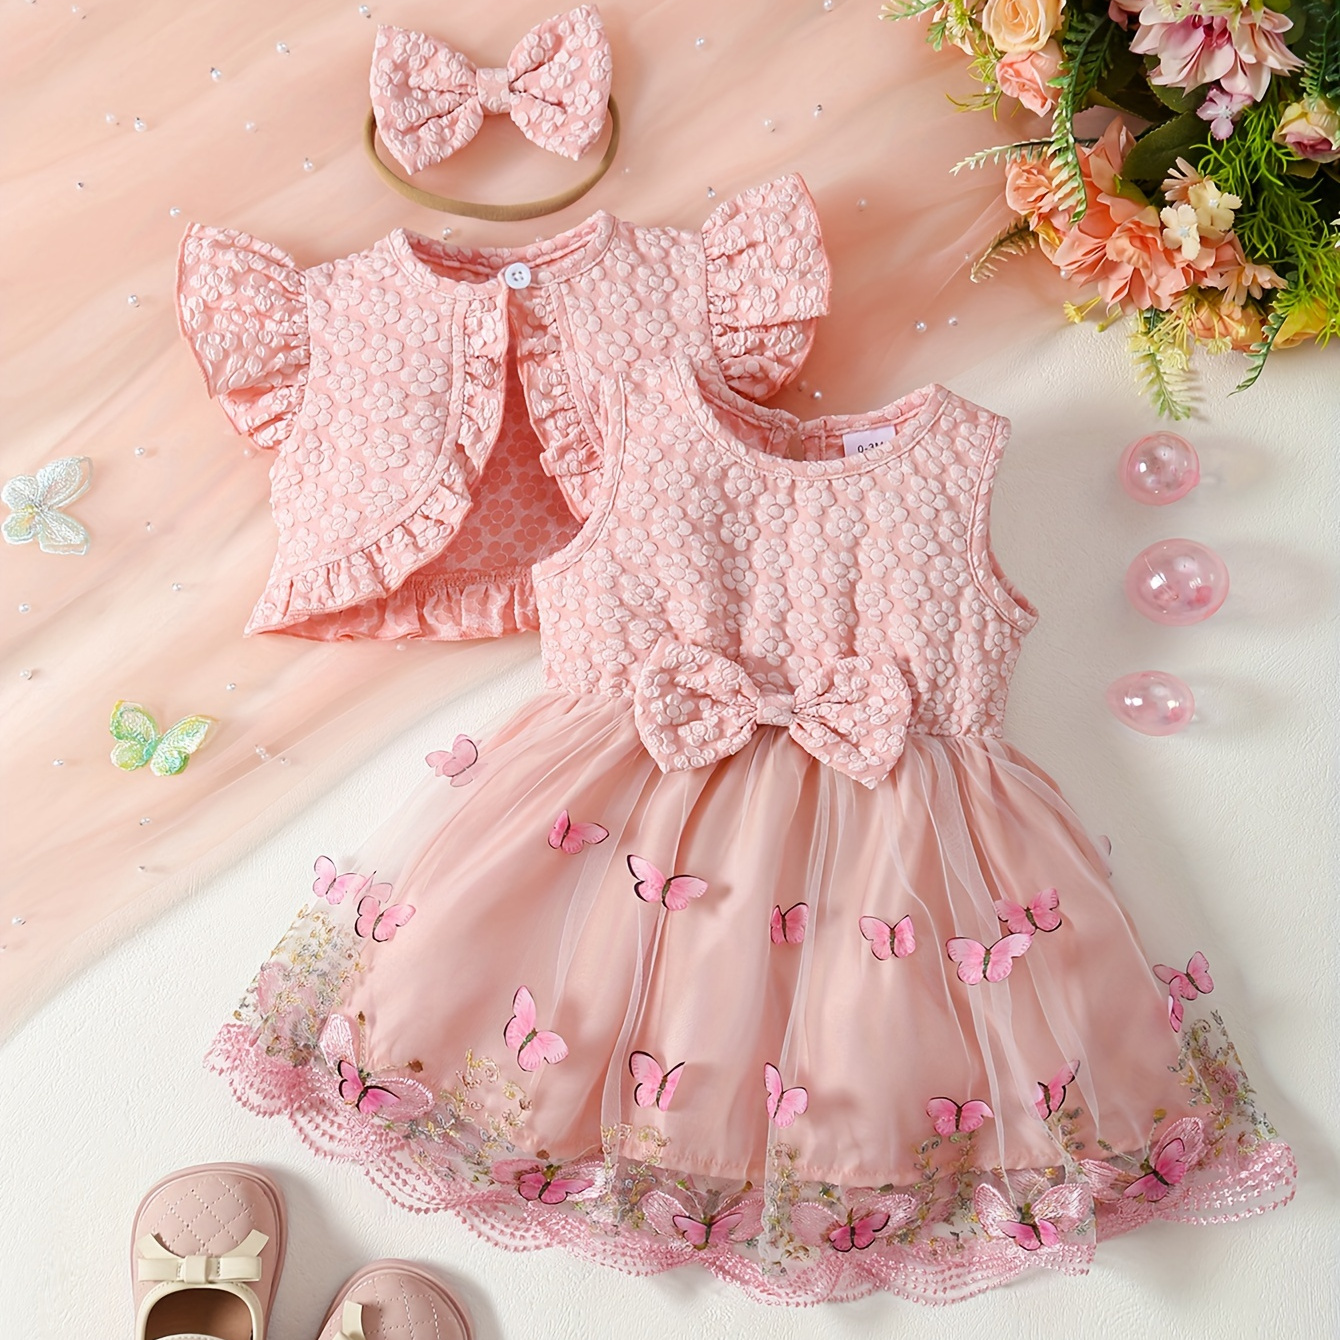 

Baby's Butterfly Embroidered 2pcs Elegant Summer Outfit, Flower Jacquard Cardigan & Bowknot Headwear & Sleeveless Mesh Princess Dress Set, Toddler & Infant Girl's Clothes For Daily/holiday, As Gift